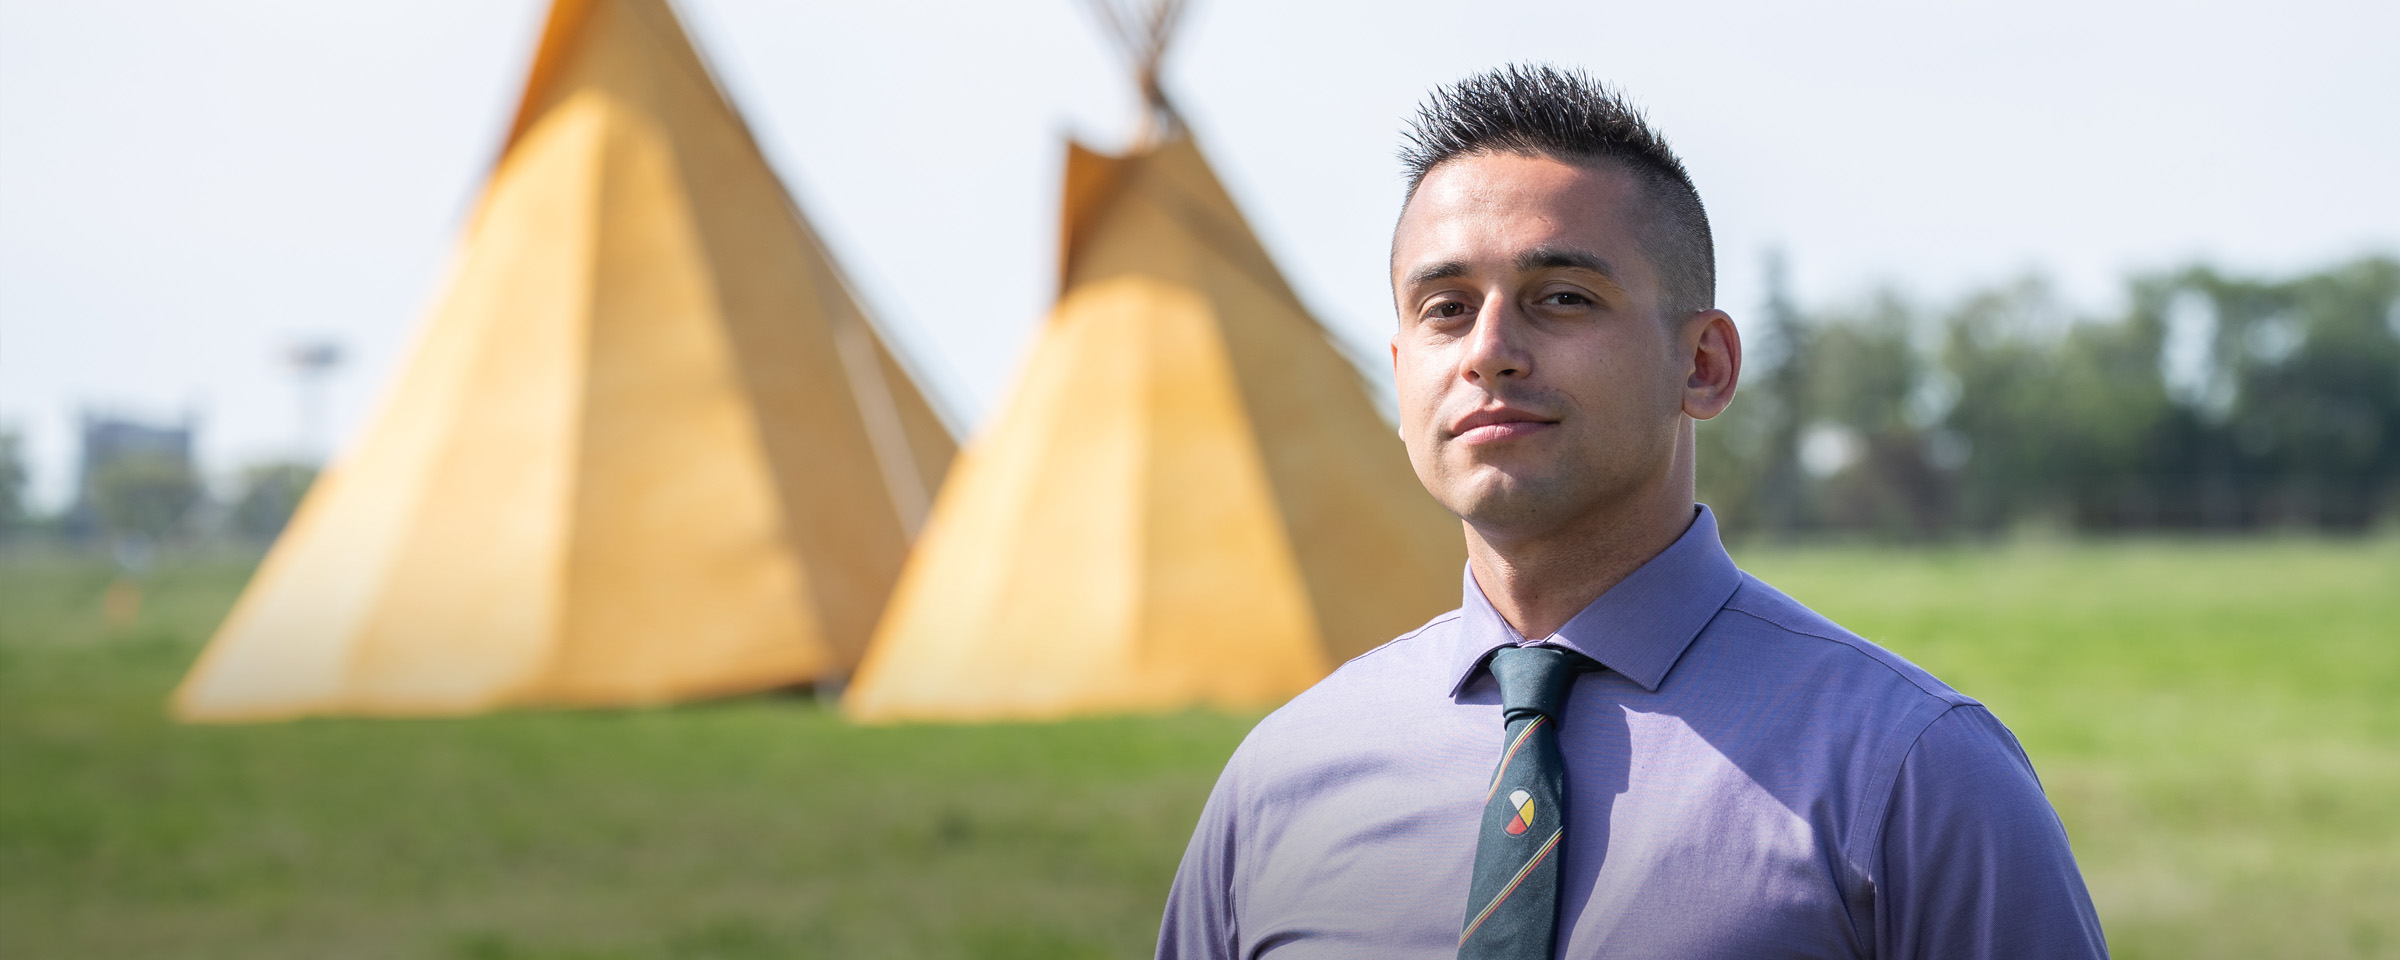 RRC Polytech grad Vic Savino, standing in front of two teepees.